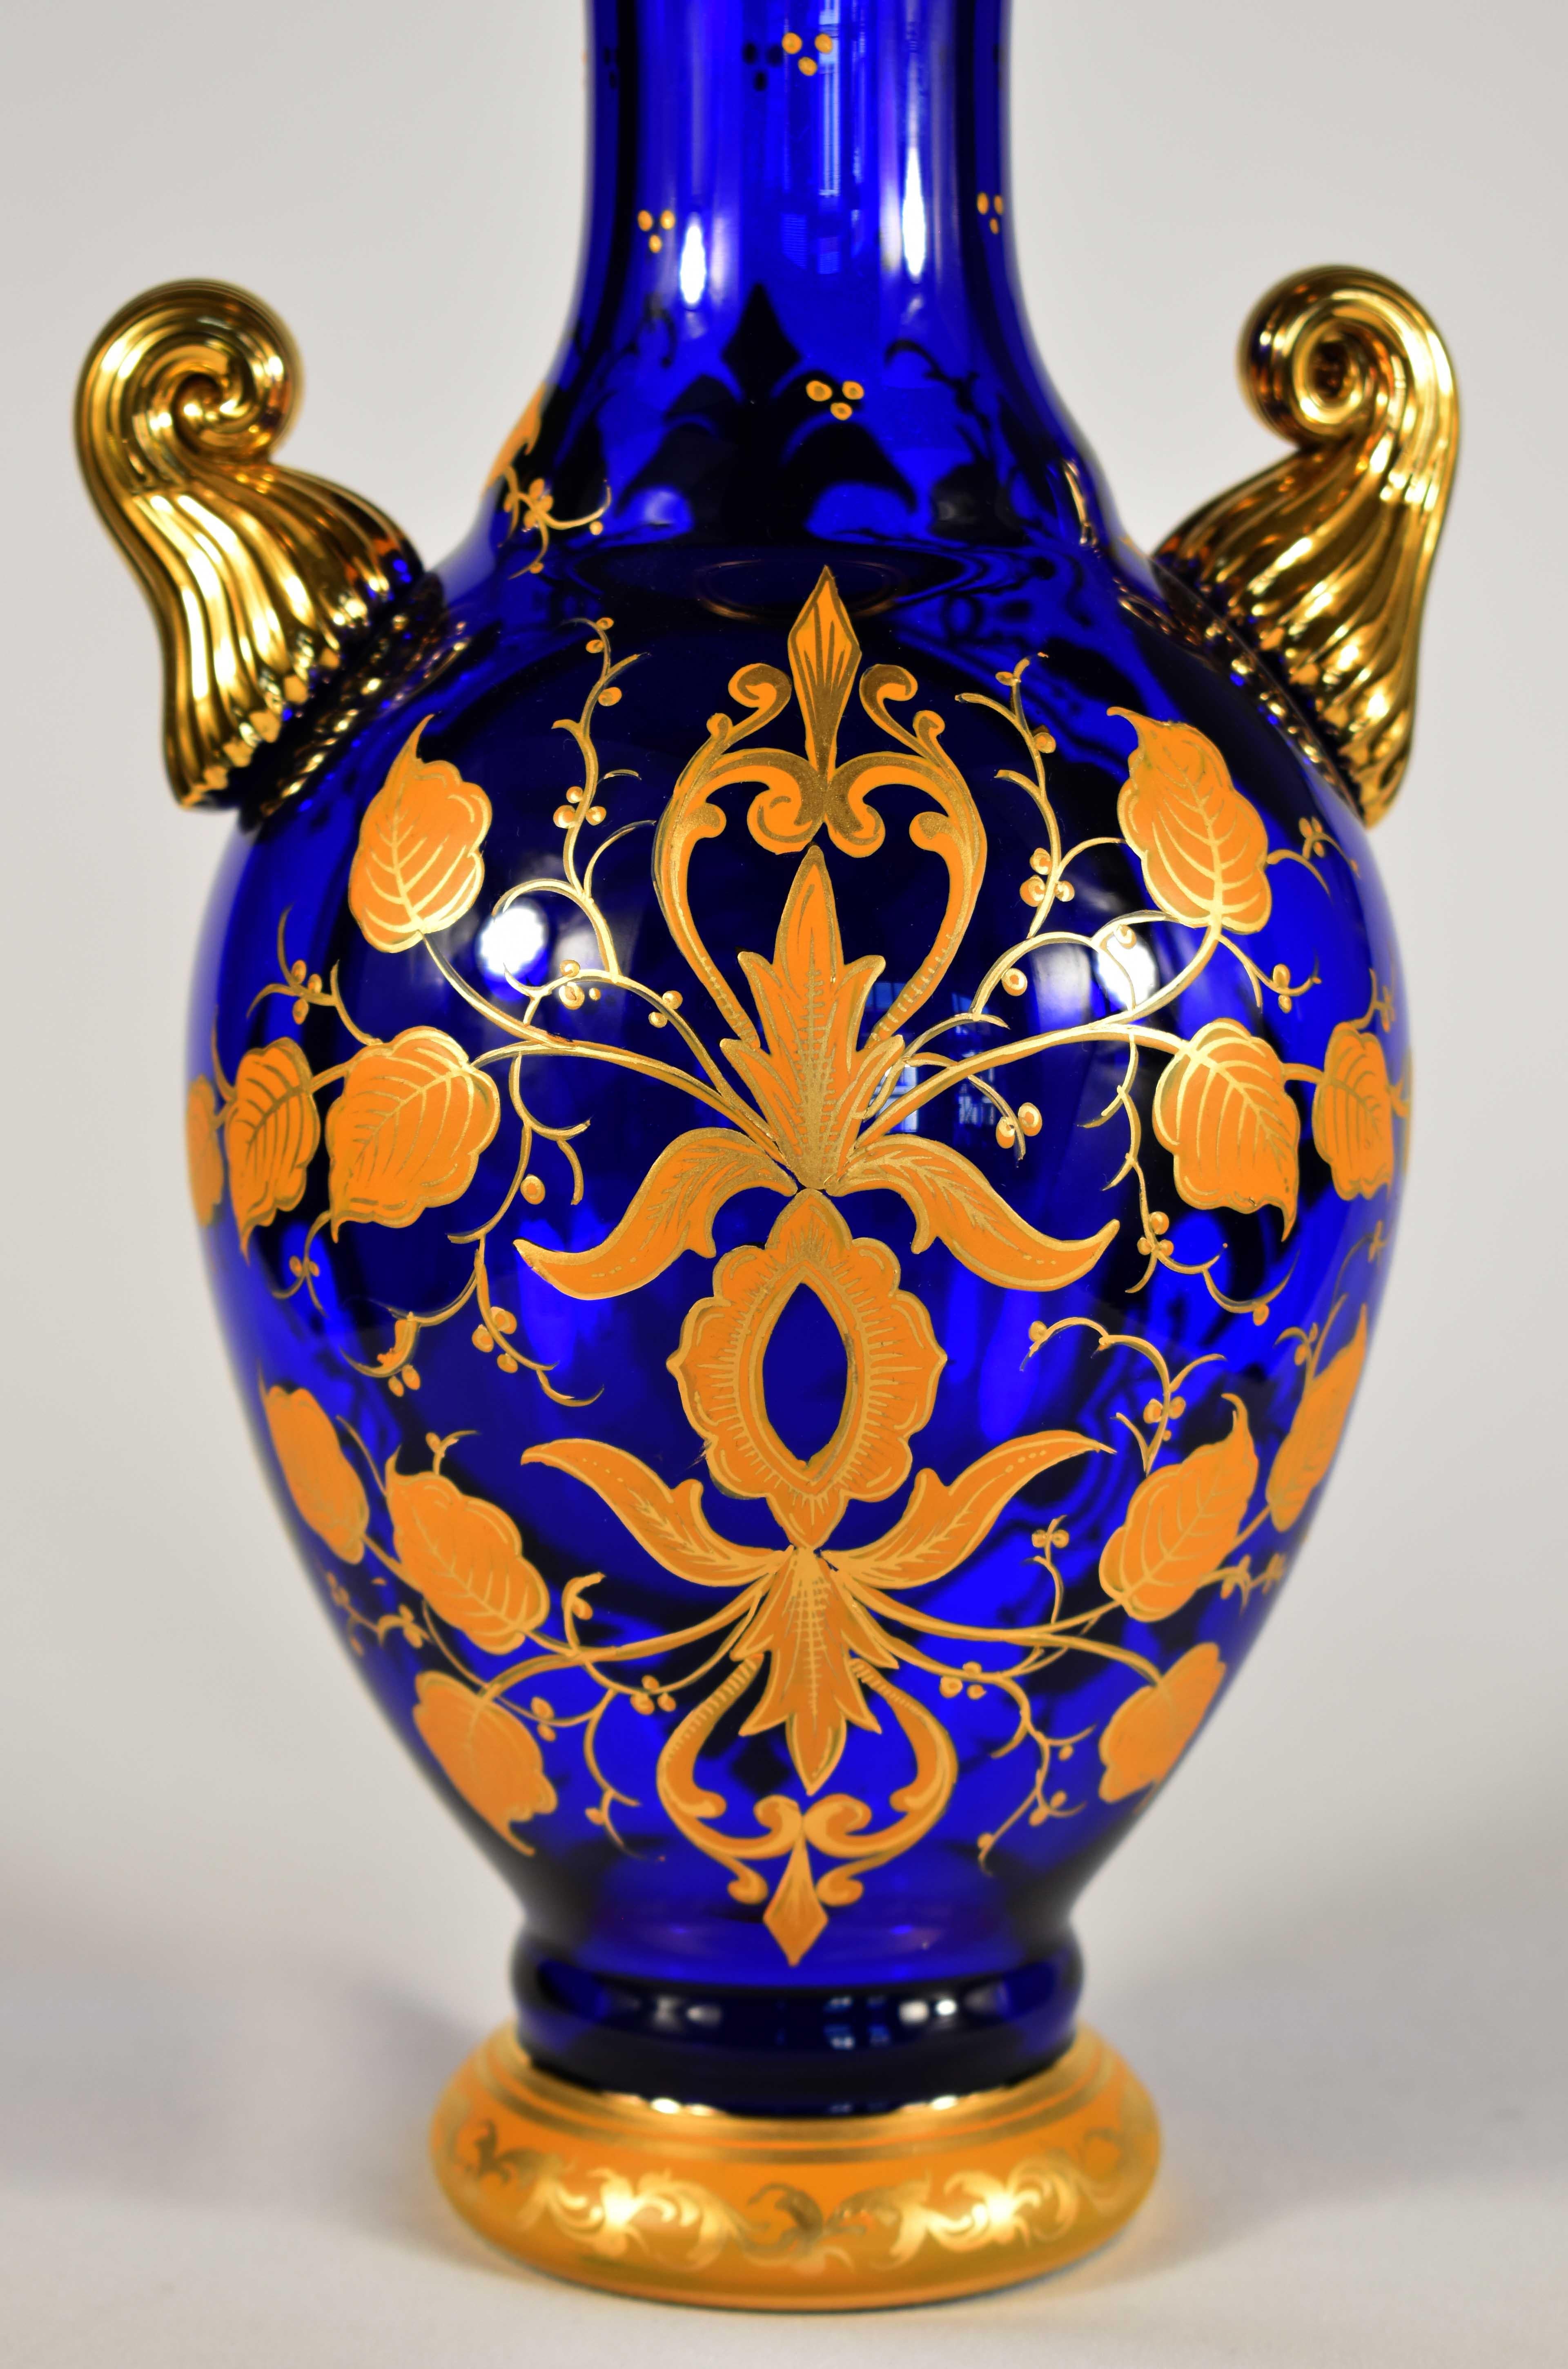 Pair of Blue Hand-Painted and Gilded Vases, Bohemian Glass 20h Century For Sale 1